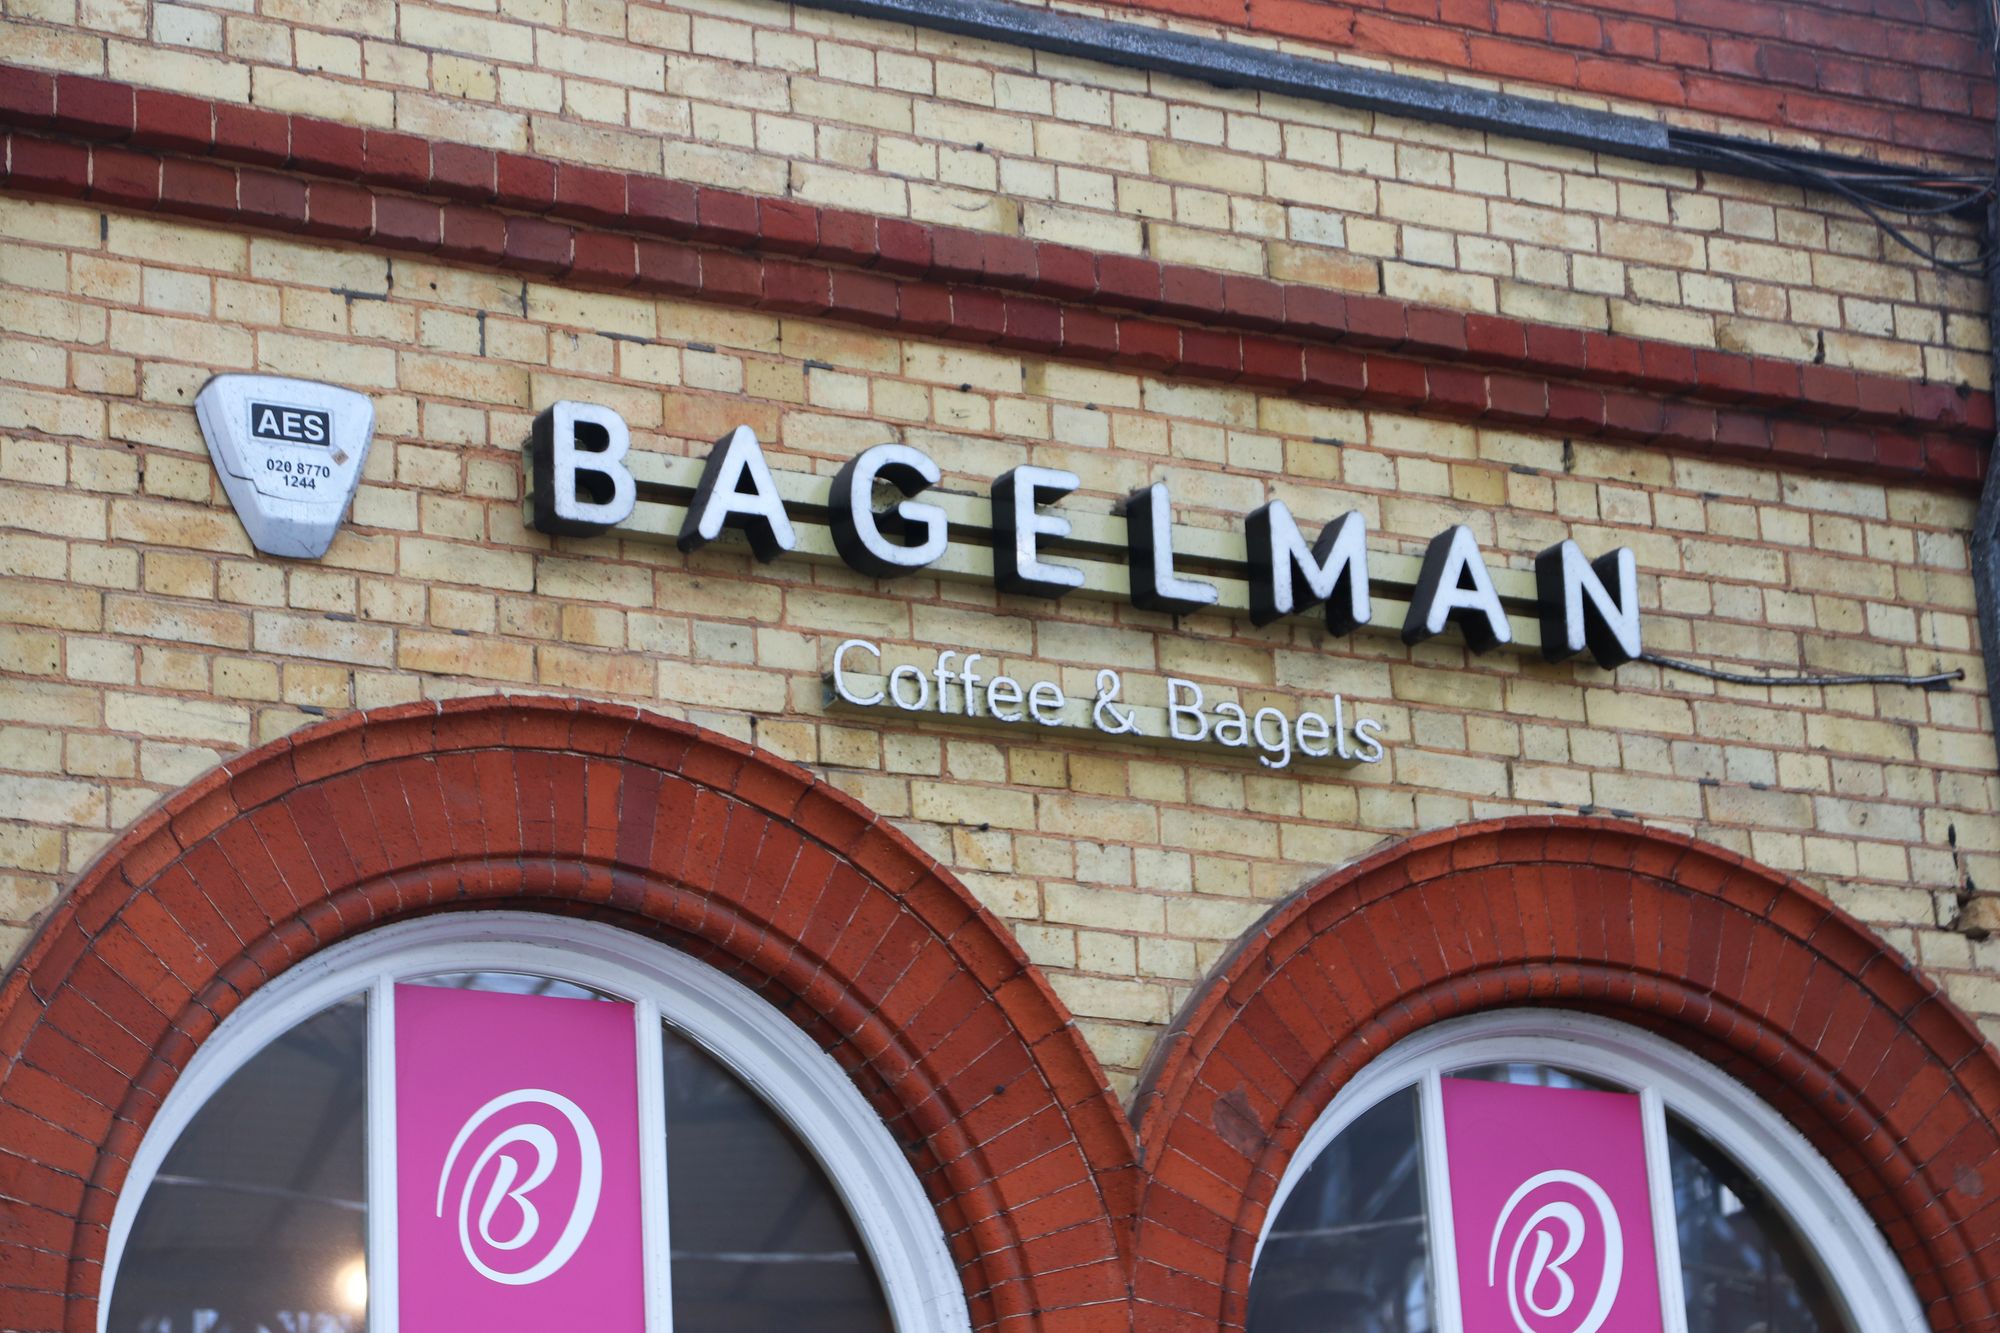 The outside of Bagelman showing the sign 'Bagelman coffee and bagels'